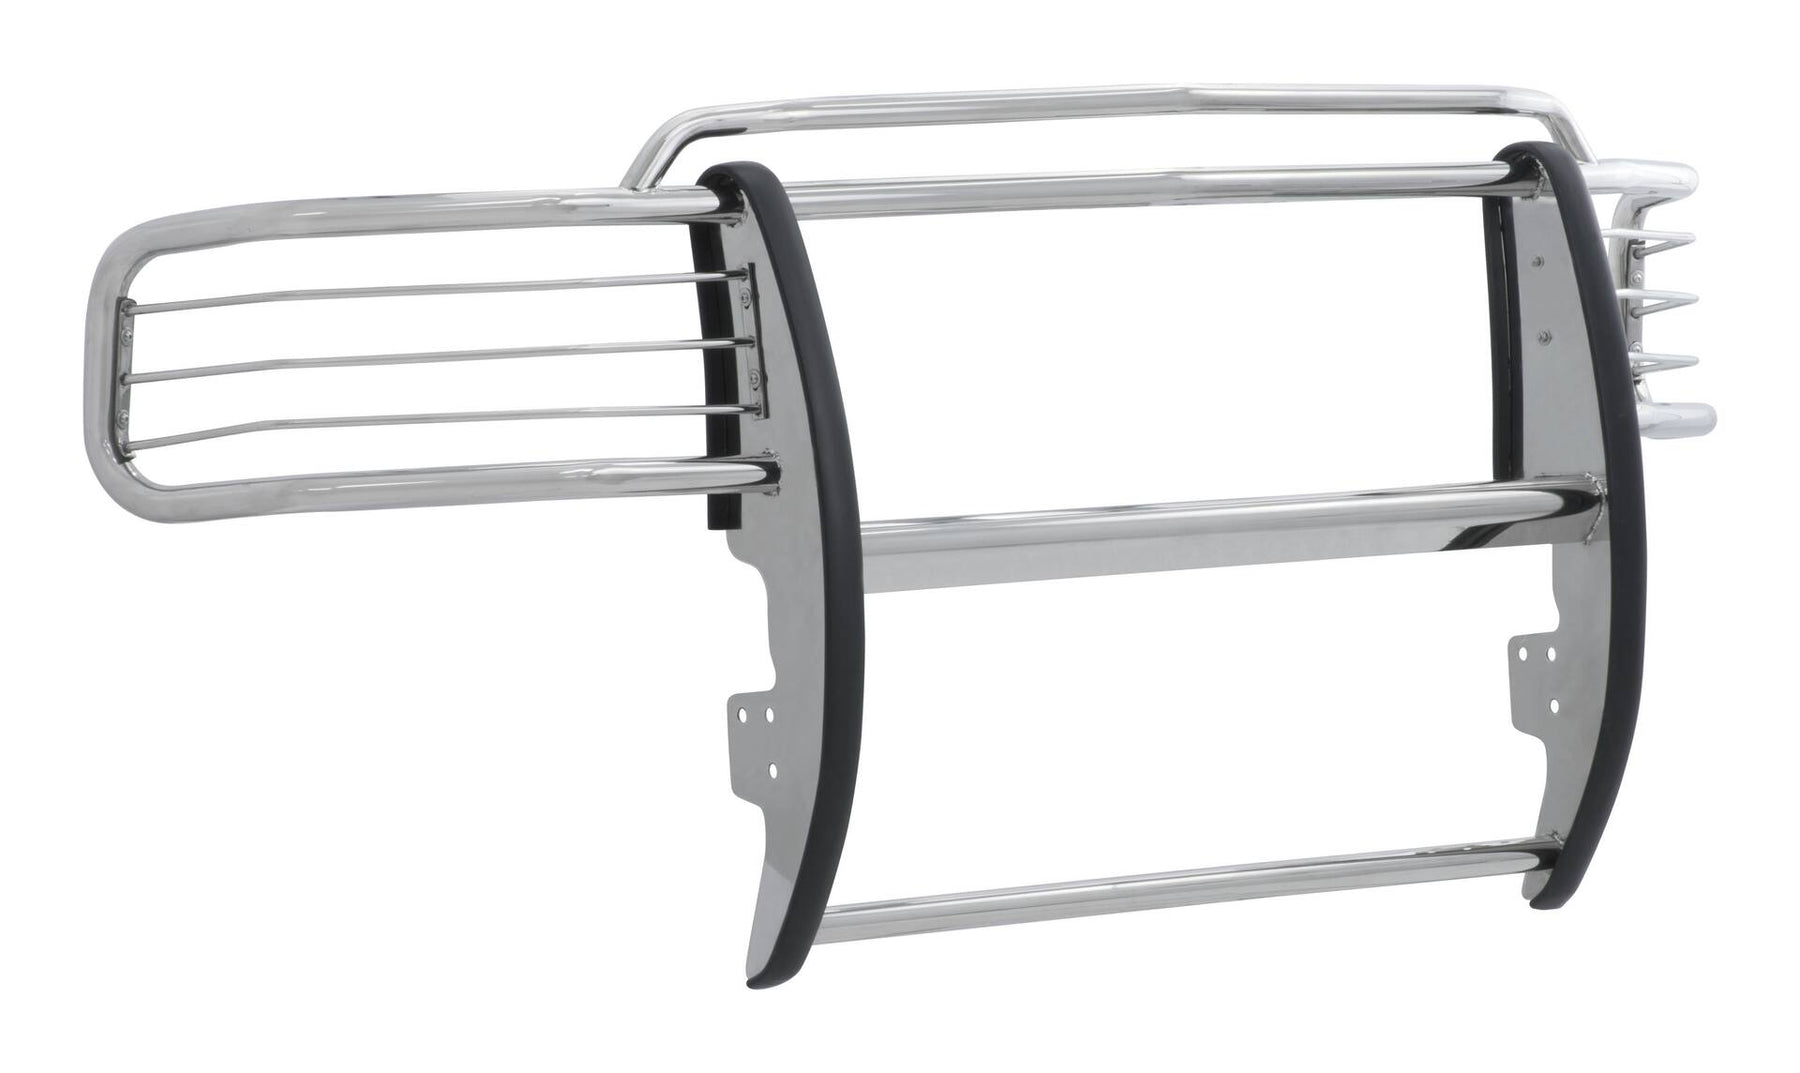 3045-2 Aries Grille Guard, Polished Stainless